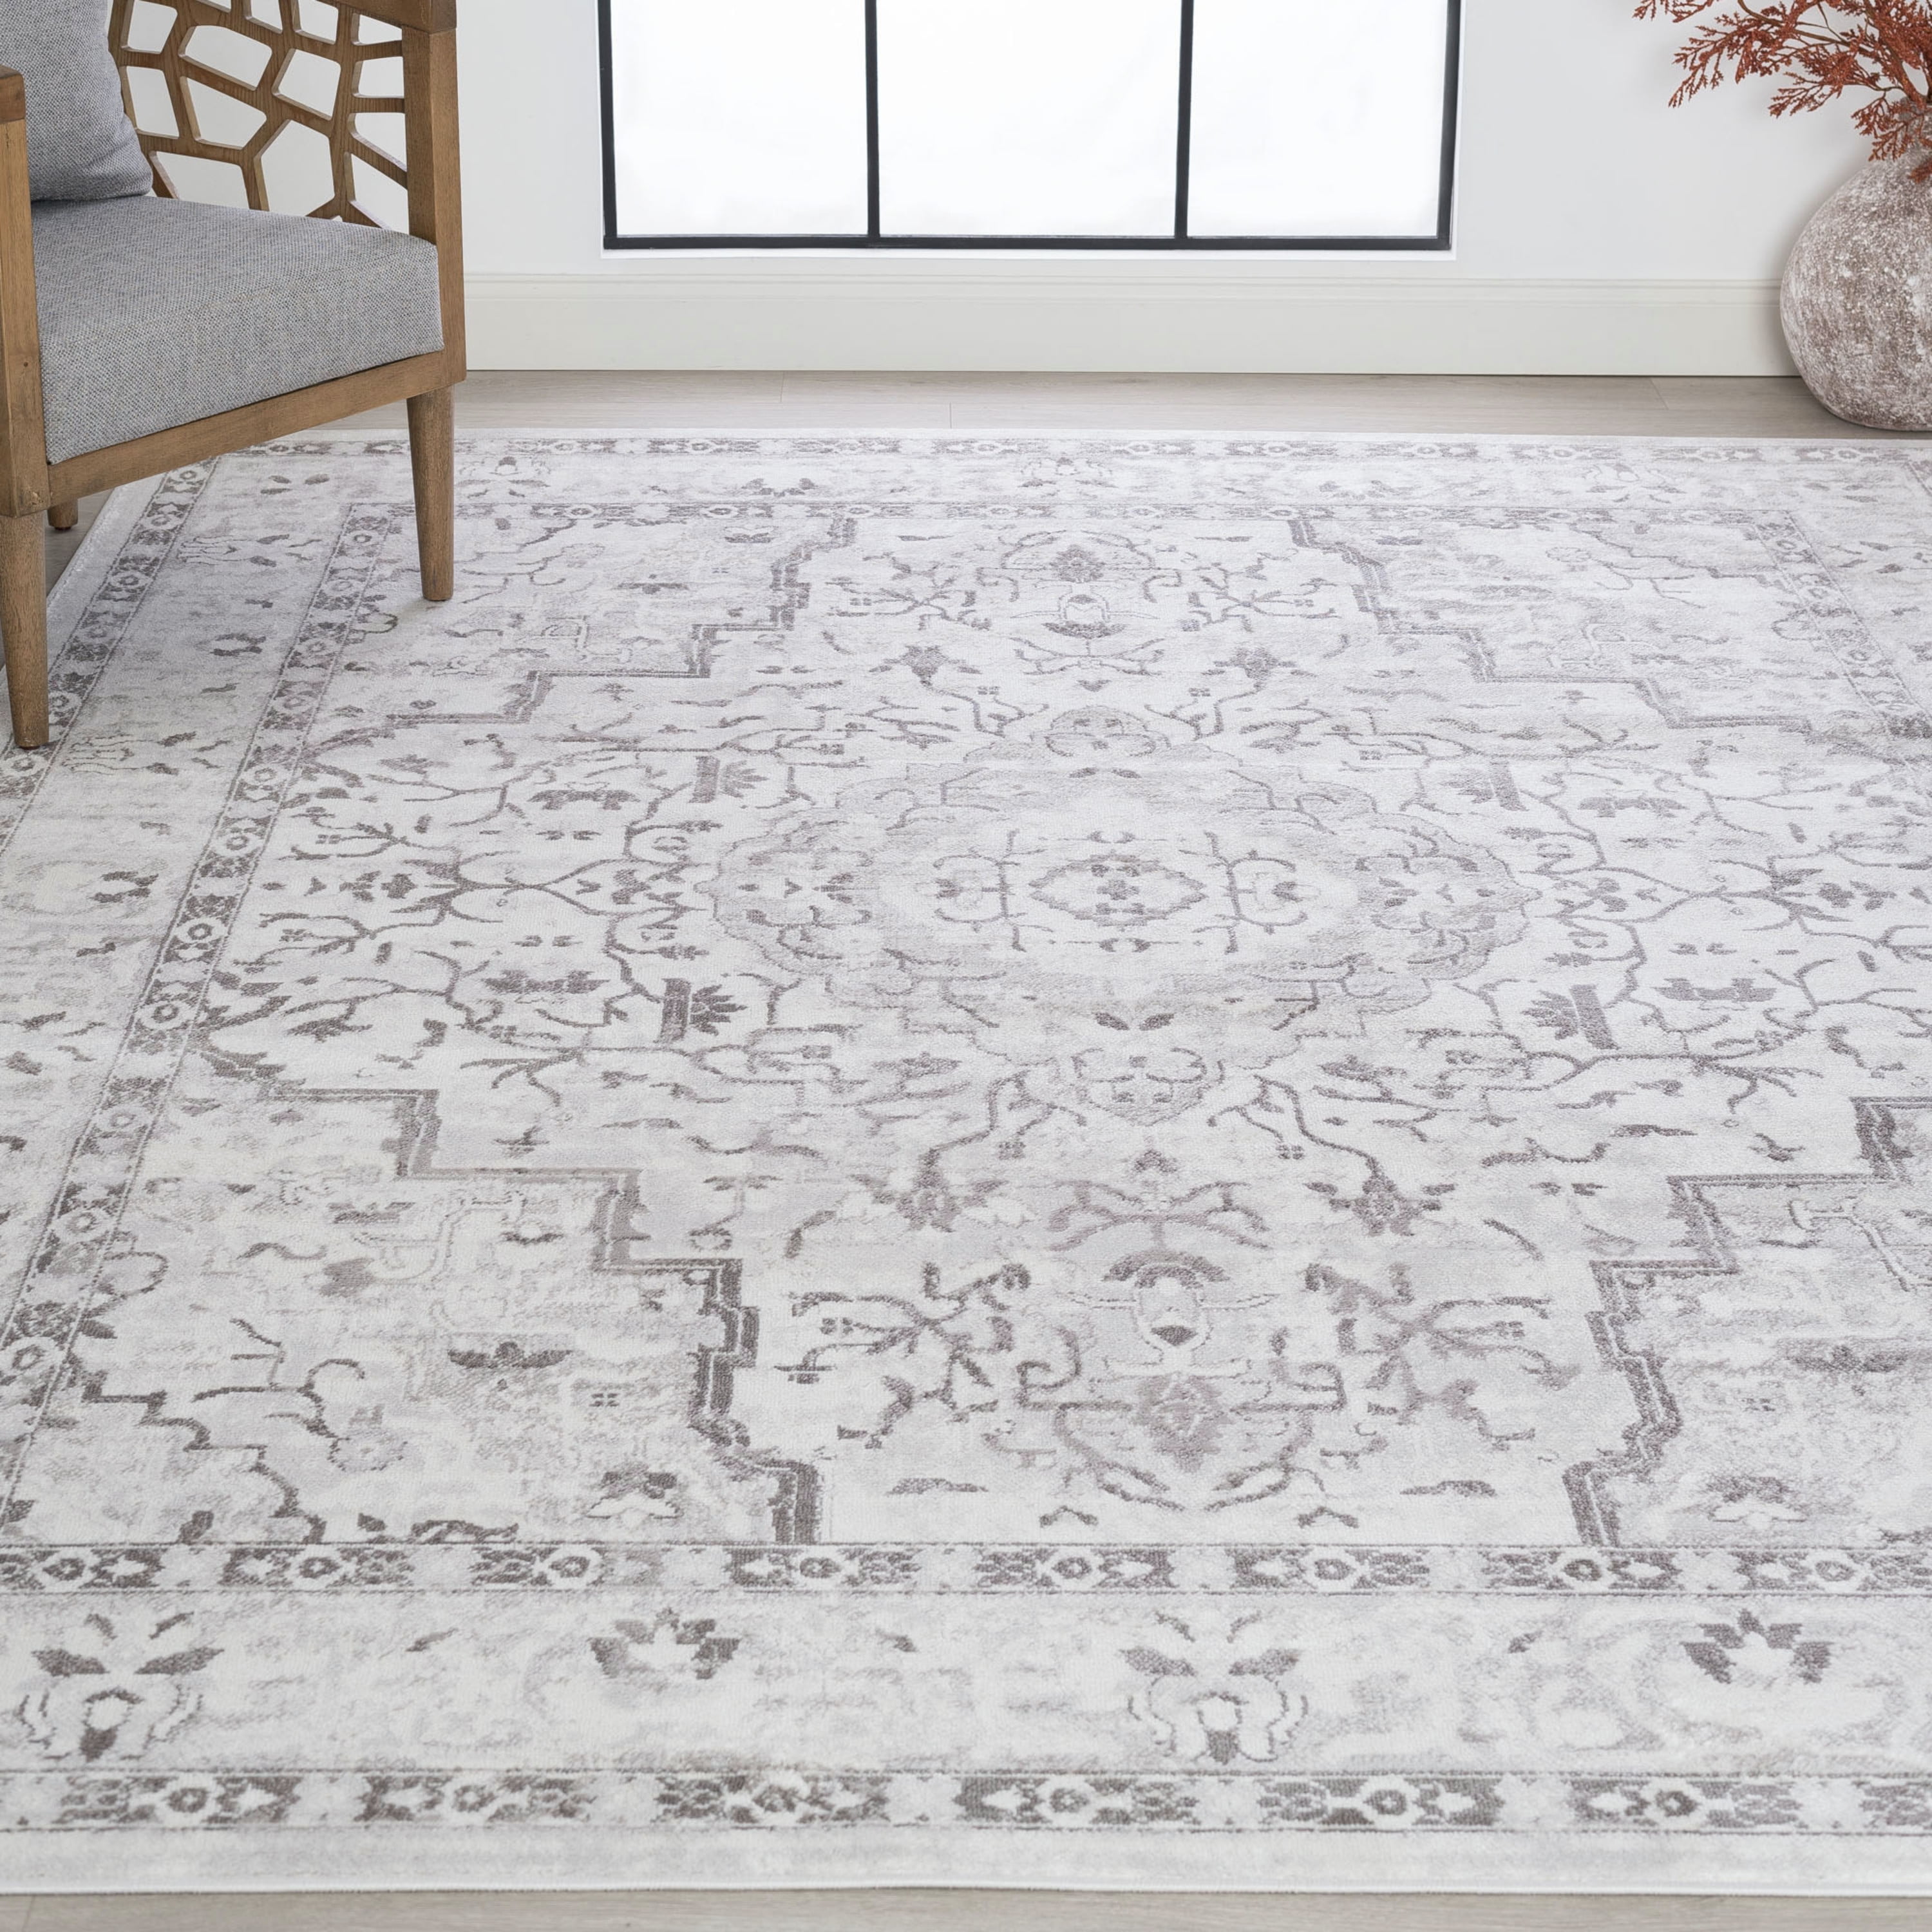 Vintage Inspired Area Rug Floral Print 9x12 Traditional Distressed Clearance 